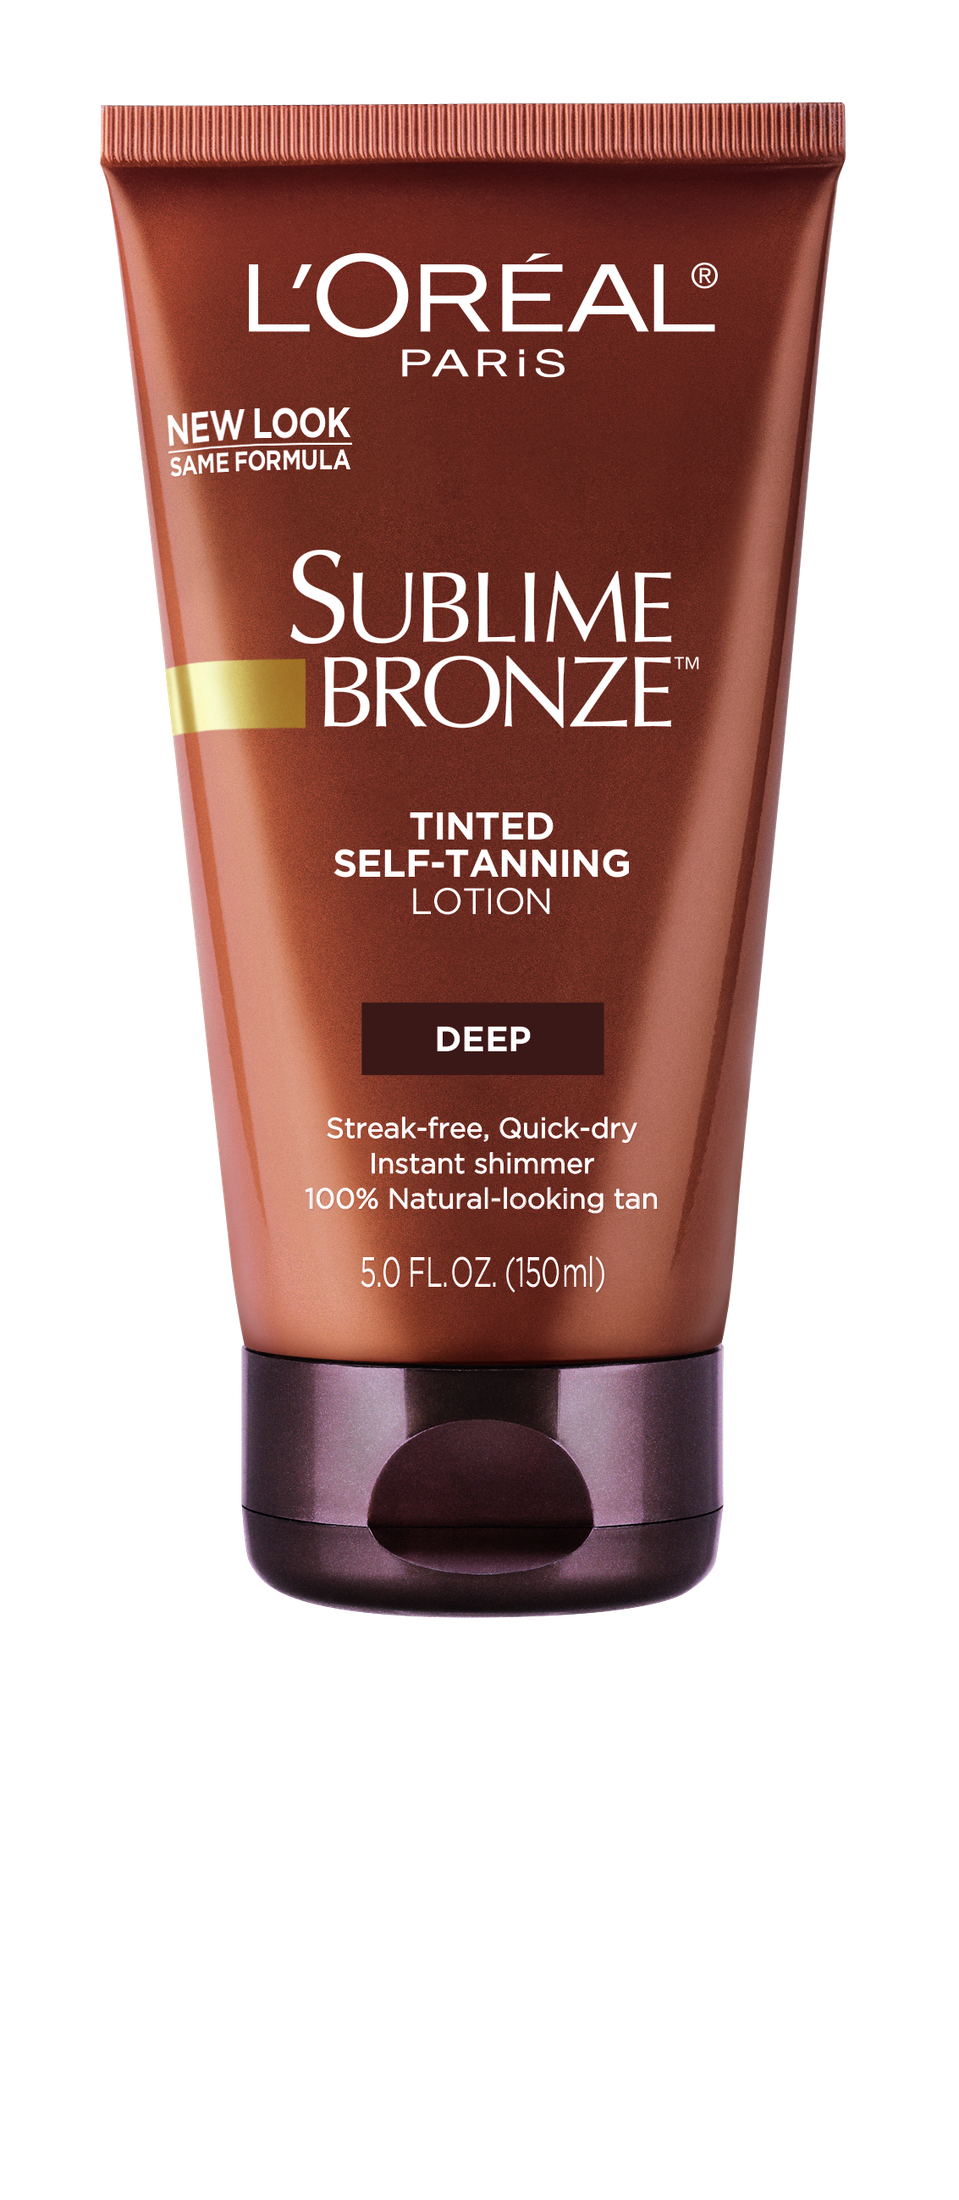 L'Oreal Paris Sublime Bronze Tinted Self-Tanning Lotion for Face, Deep, 5 fl oz - image 1 of 6